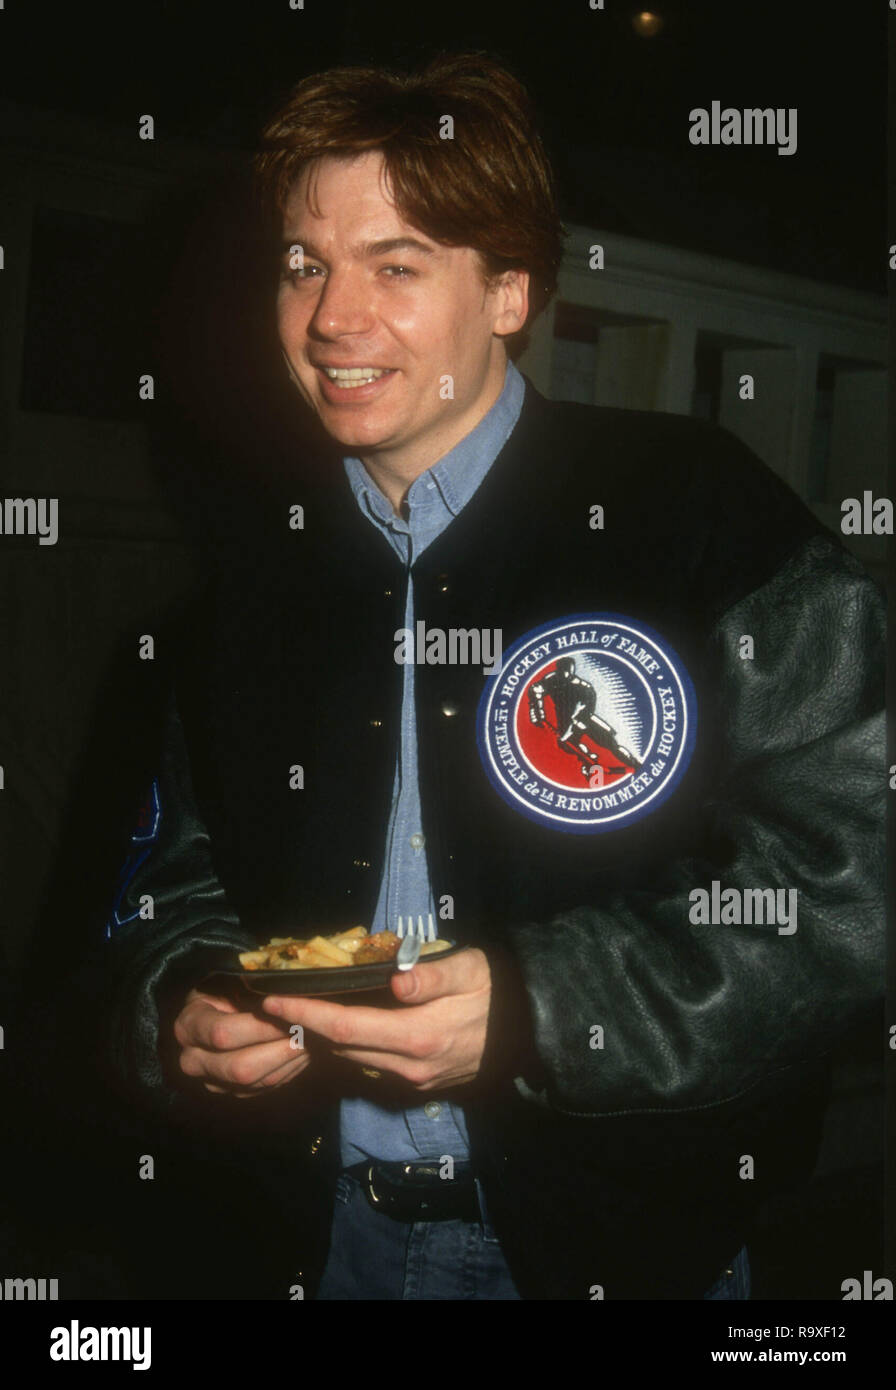 HOLLYWOOD, CA - JUNE 26: Actor/comedian Mike Myers attends the Fifth Annual Project Robin Hood Food Drive to Benefit Love Is Feeding Everyone (LIFE) on June 26, 1993 at Paramount Pictures Studios in Hollywood, California. Photo by Barry King/Alamy Stock Photo Stock Photo